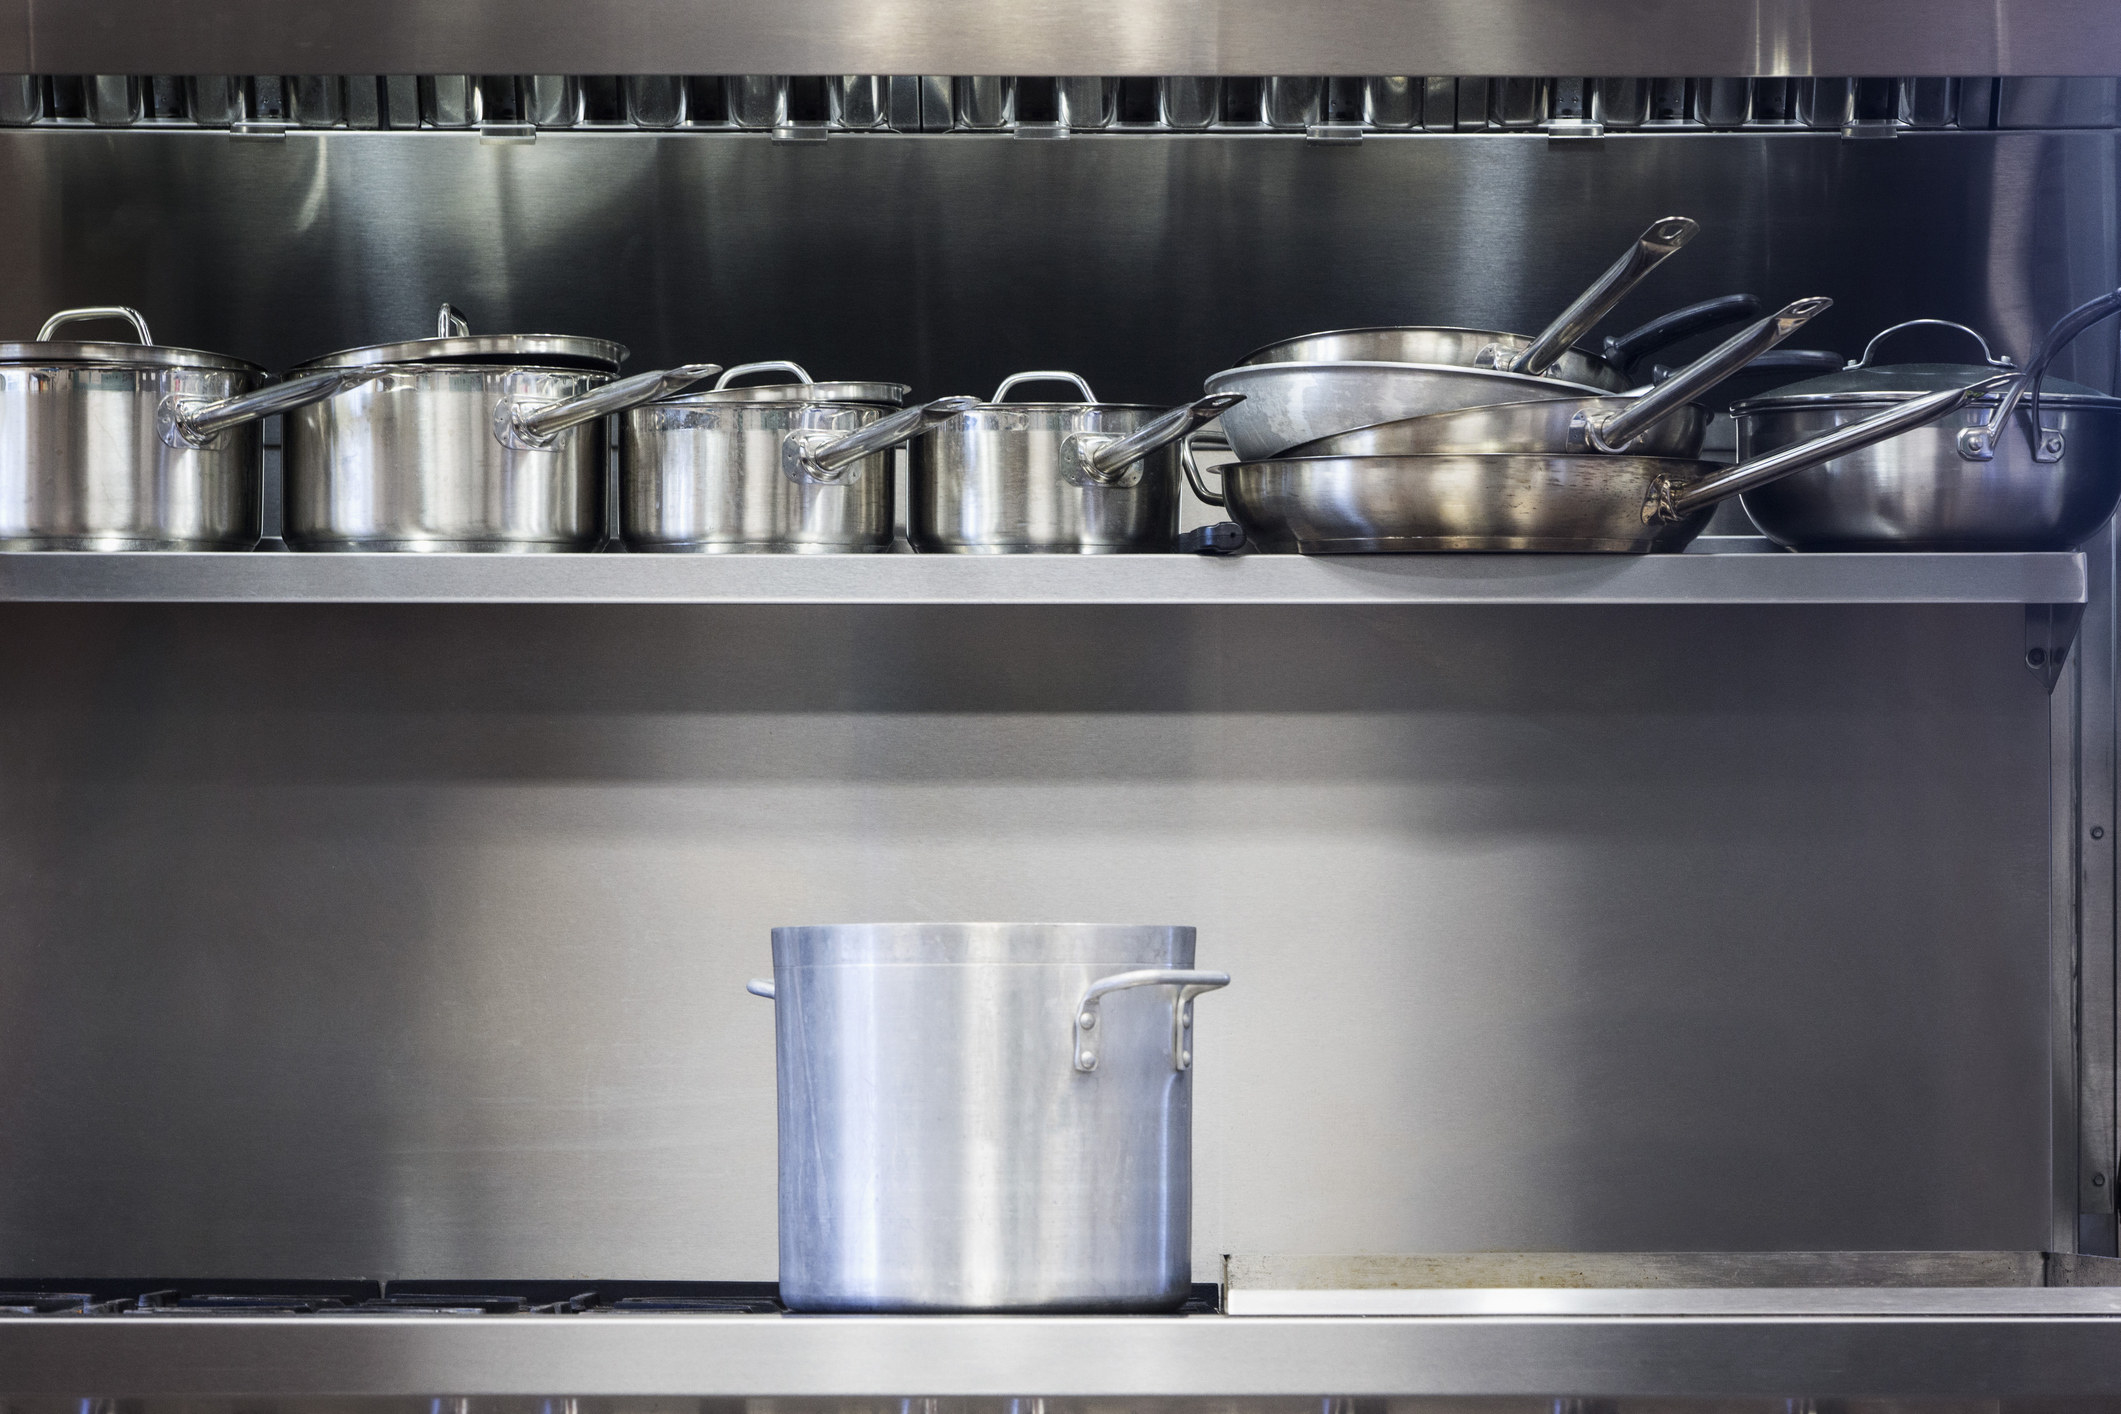 Steel pots and pans on shelves